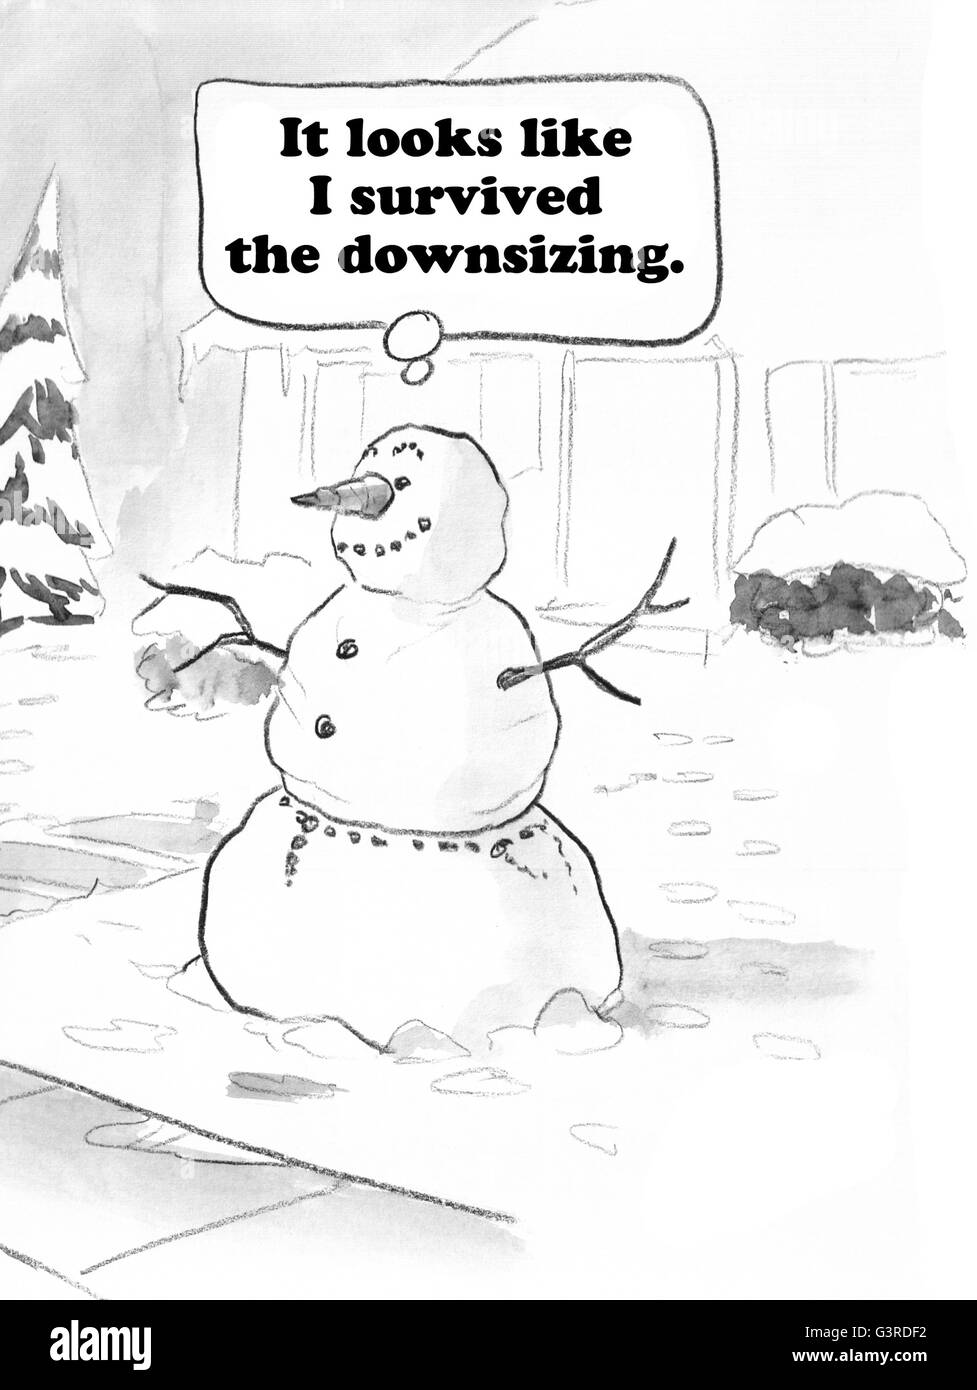 Cartoon about surviving the downsizing. Stock Photo